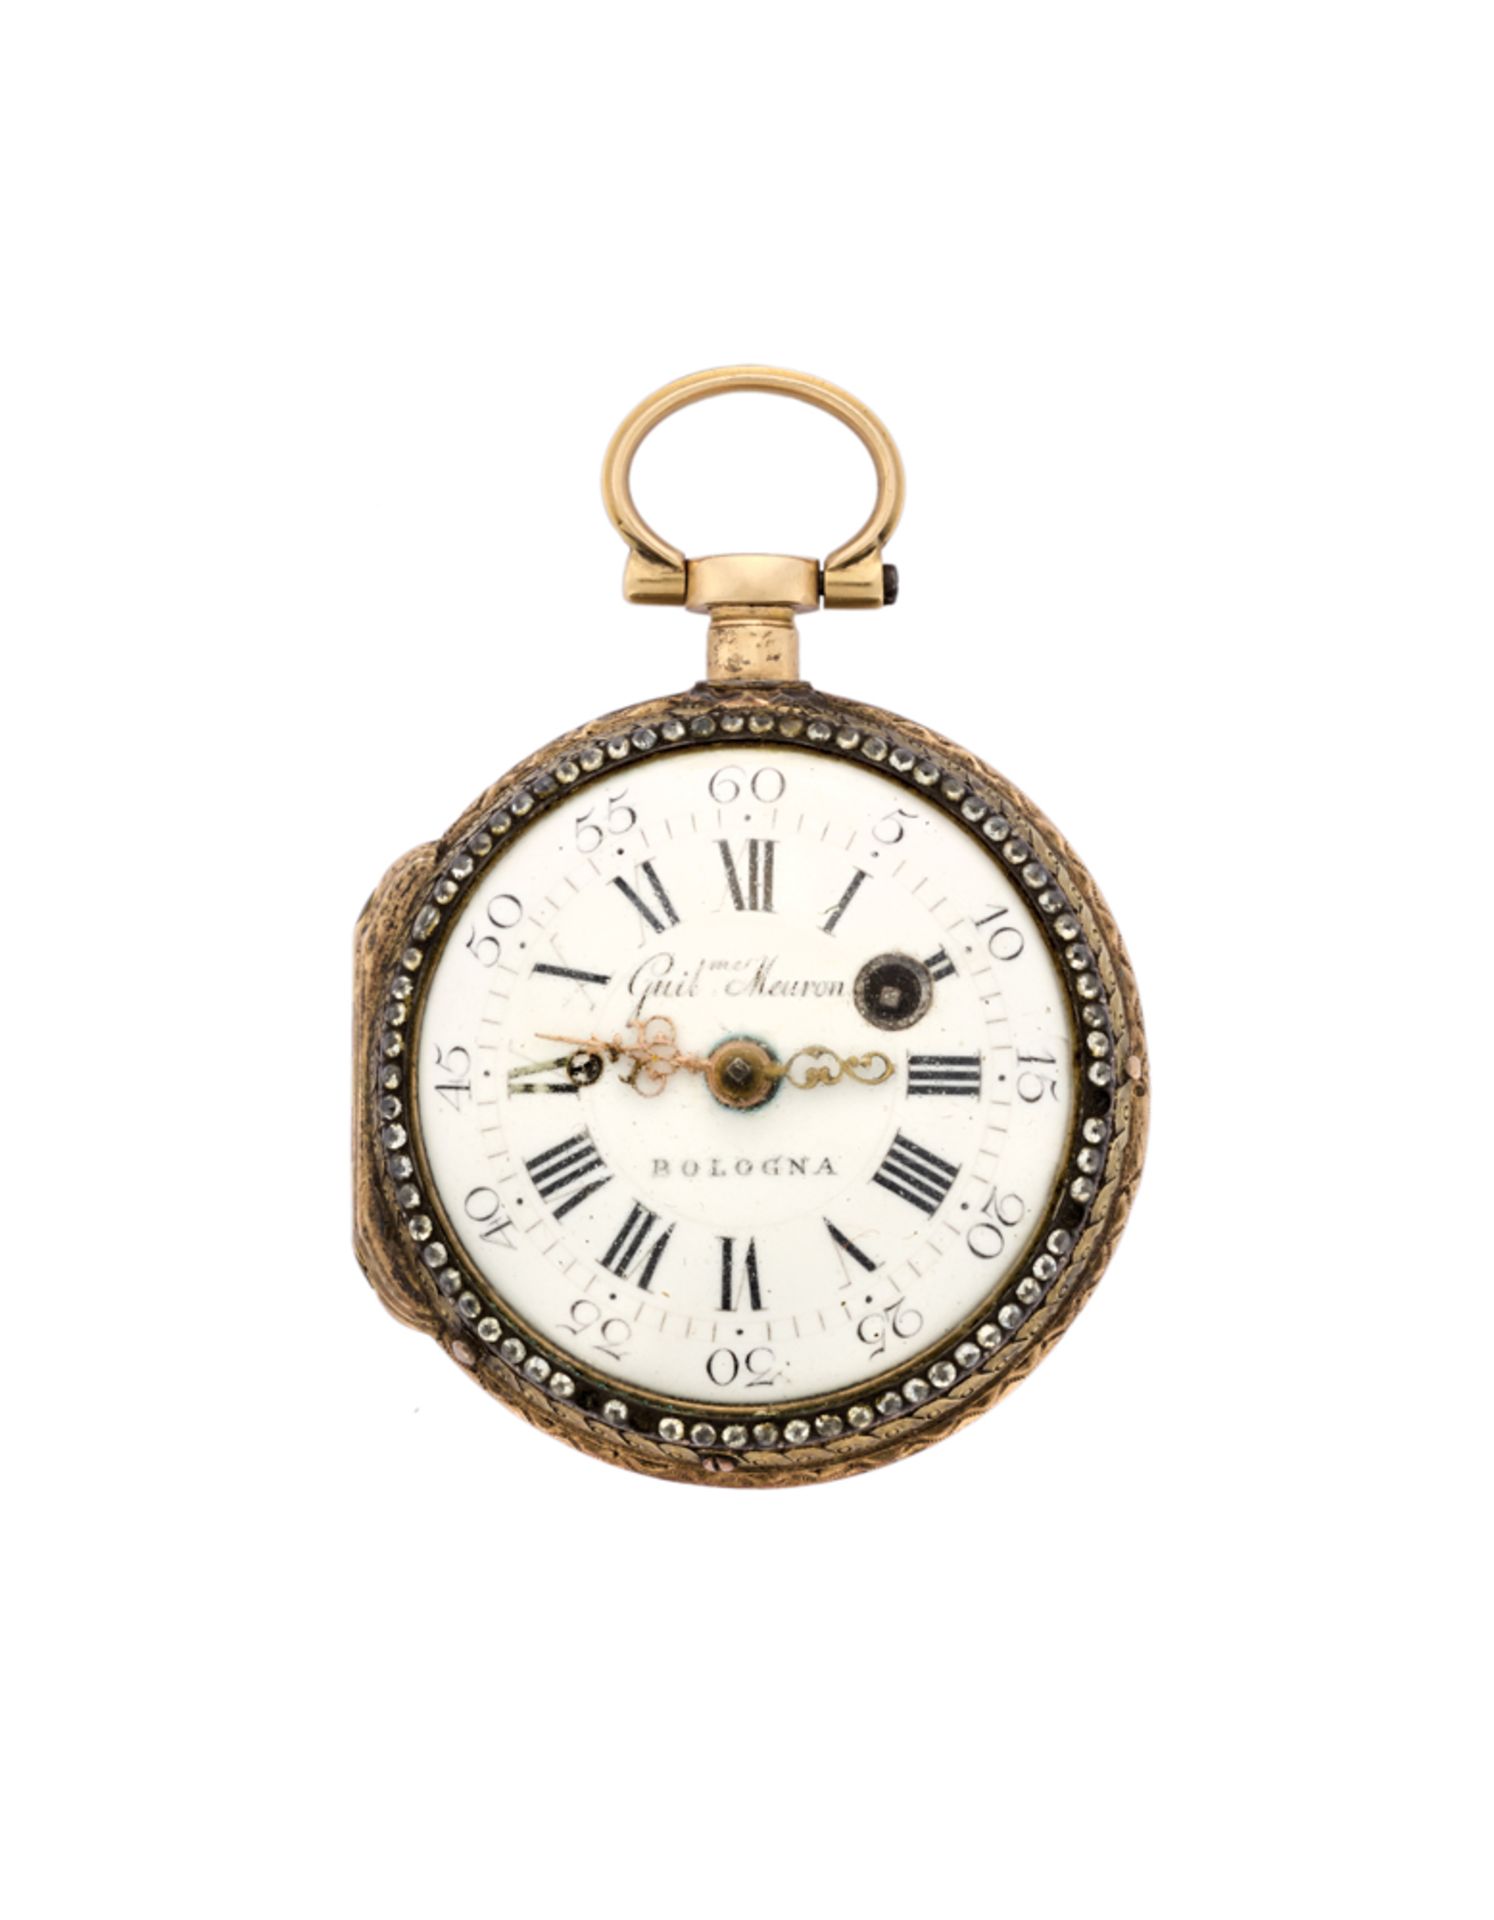 ANONYMOUSLady's 18K gold pocket watch with enamel19th centuryKey-wind movementWhite dial with